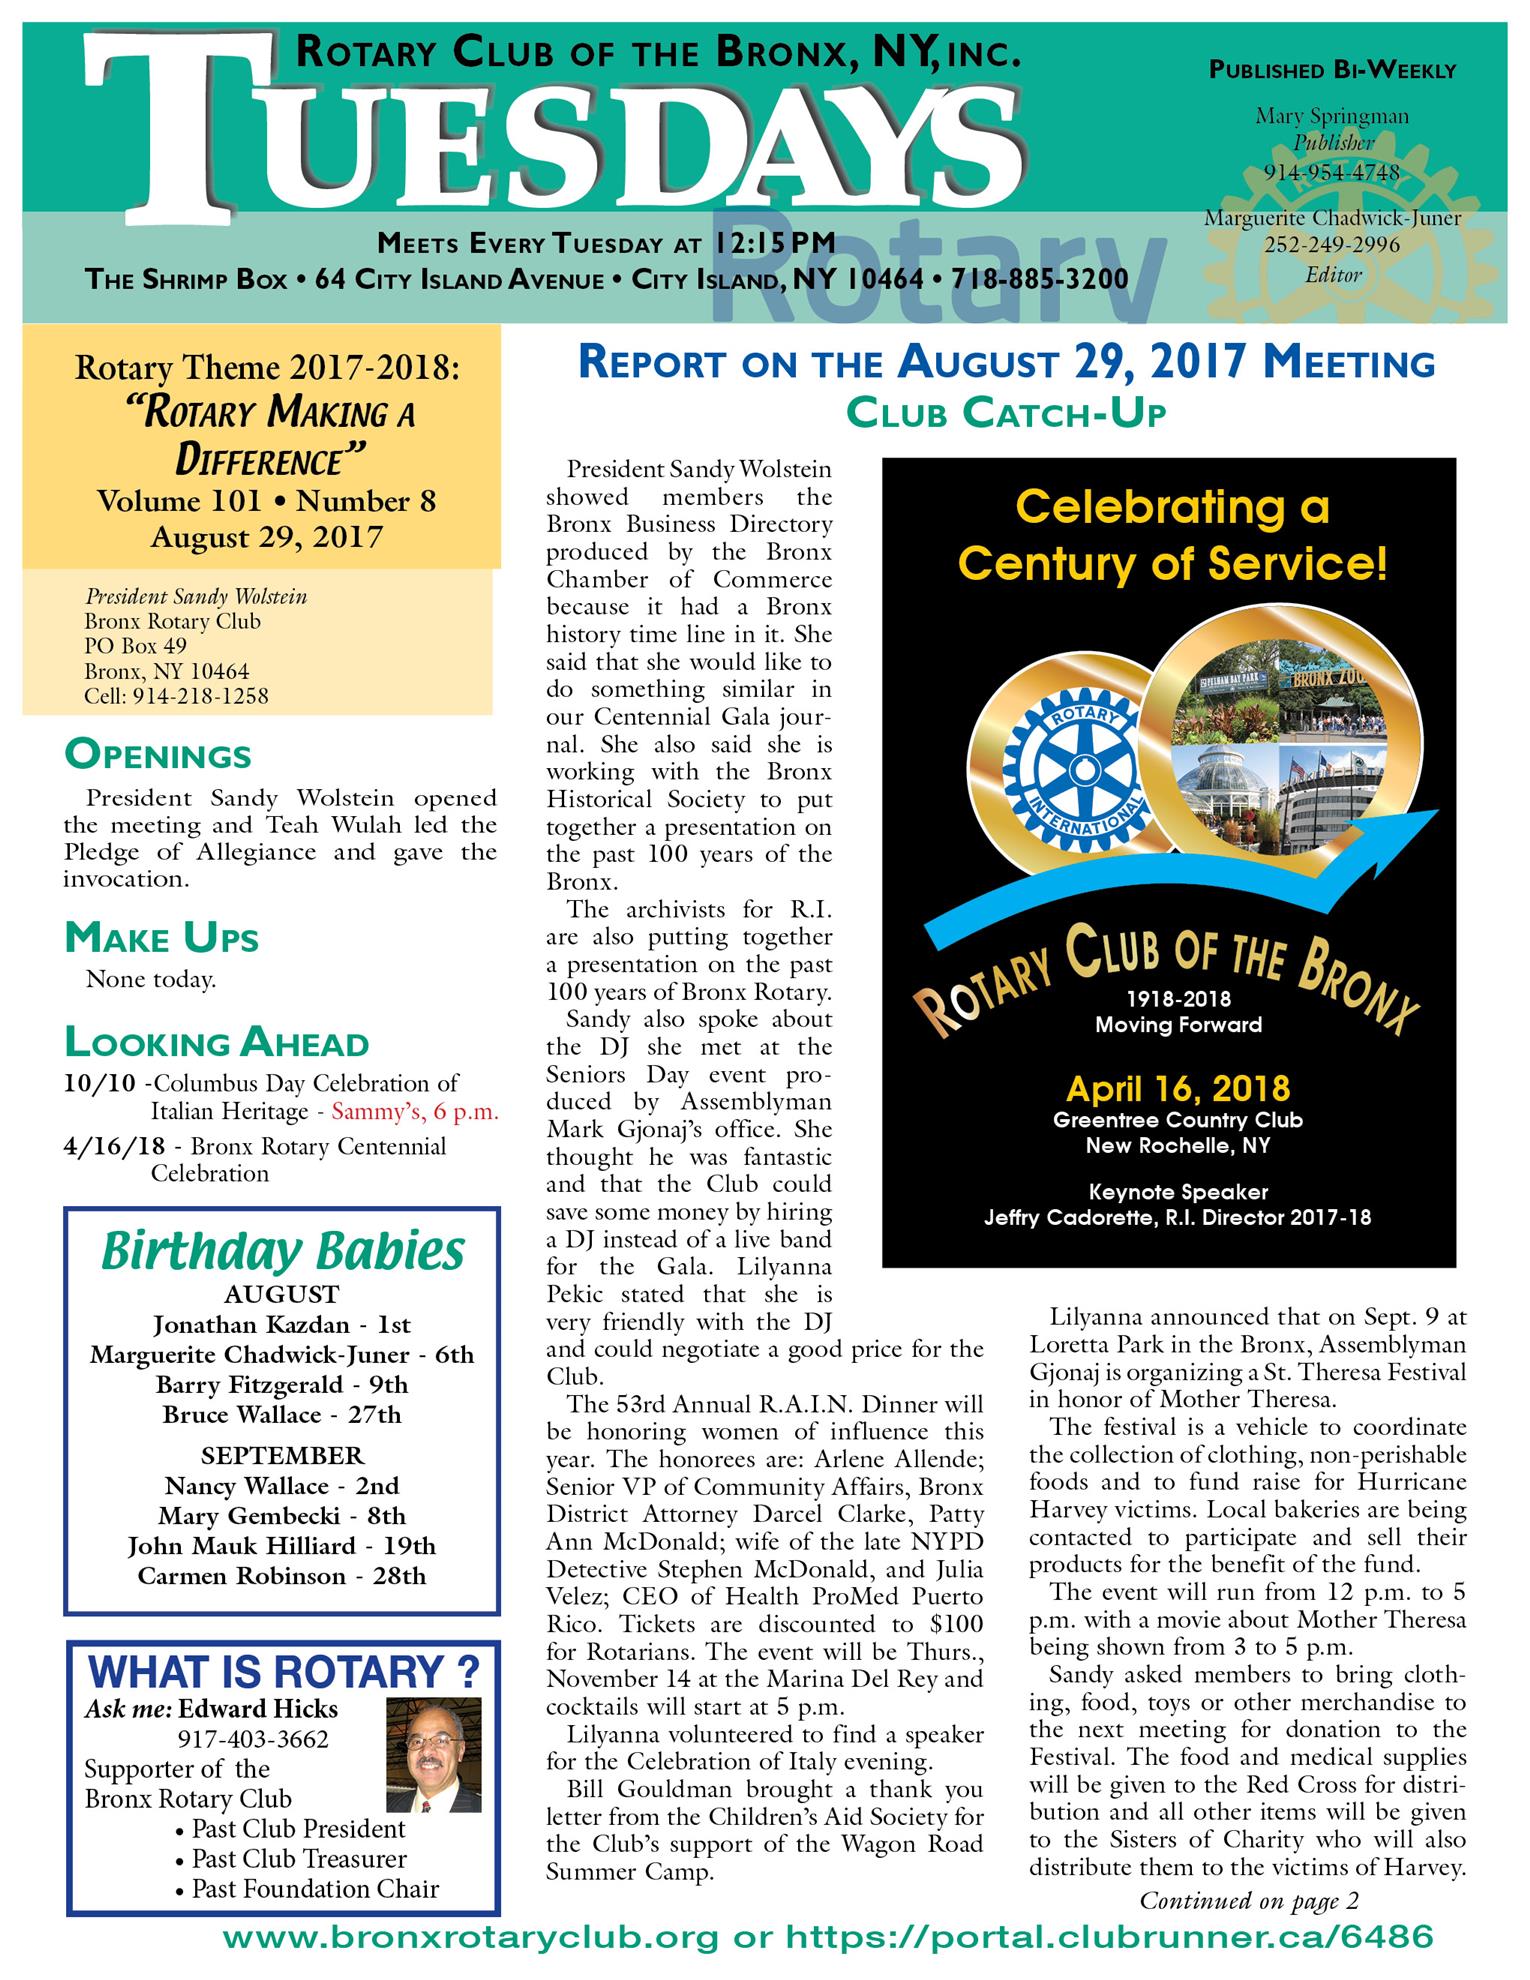 Tuesdays newsletter 8/29 - 9/12/2017 page 1